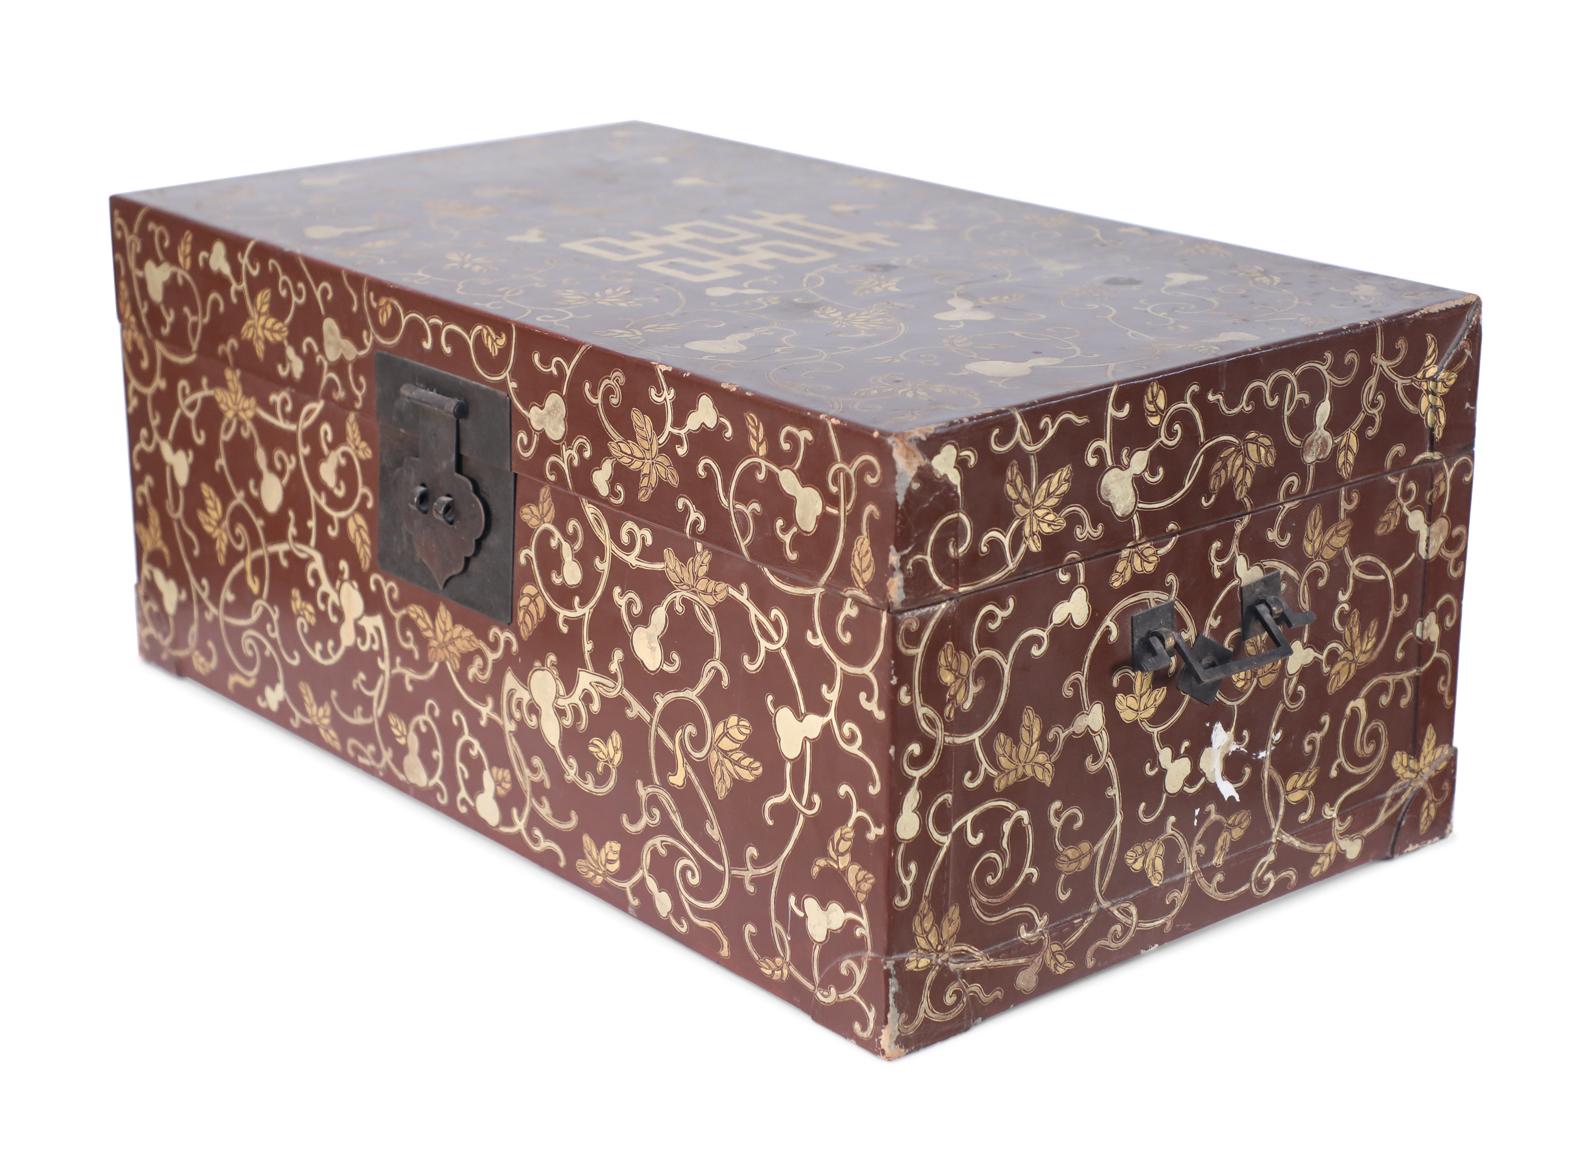 Chinese wrapped decorative box with a burgundy base with muted metallic gold gourd and leaf pattern on vines with a large central character, bronze handles and latch, and an interior lined in yellow floral shantung silk with a central stamp.